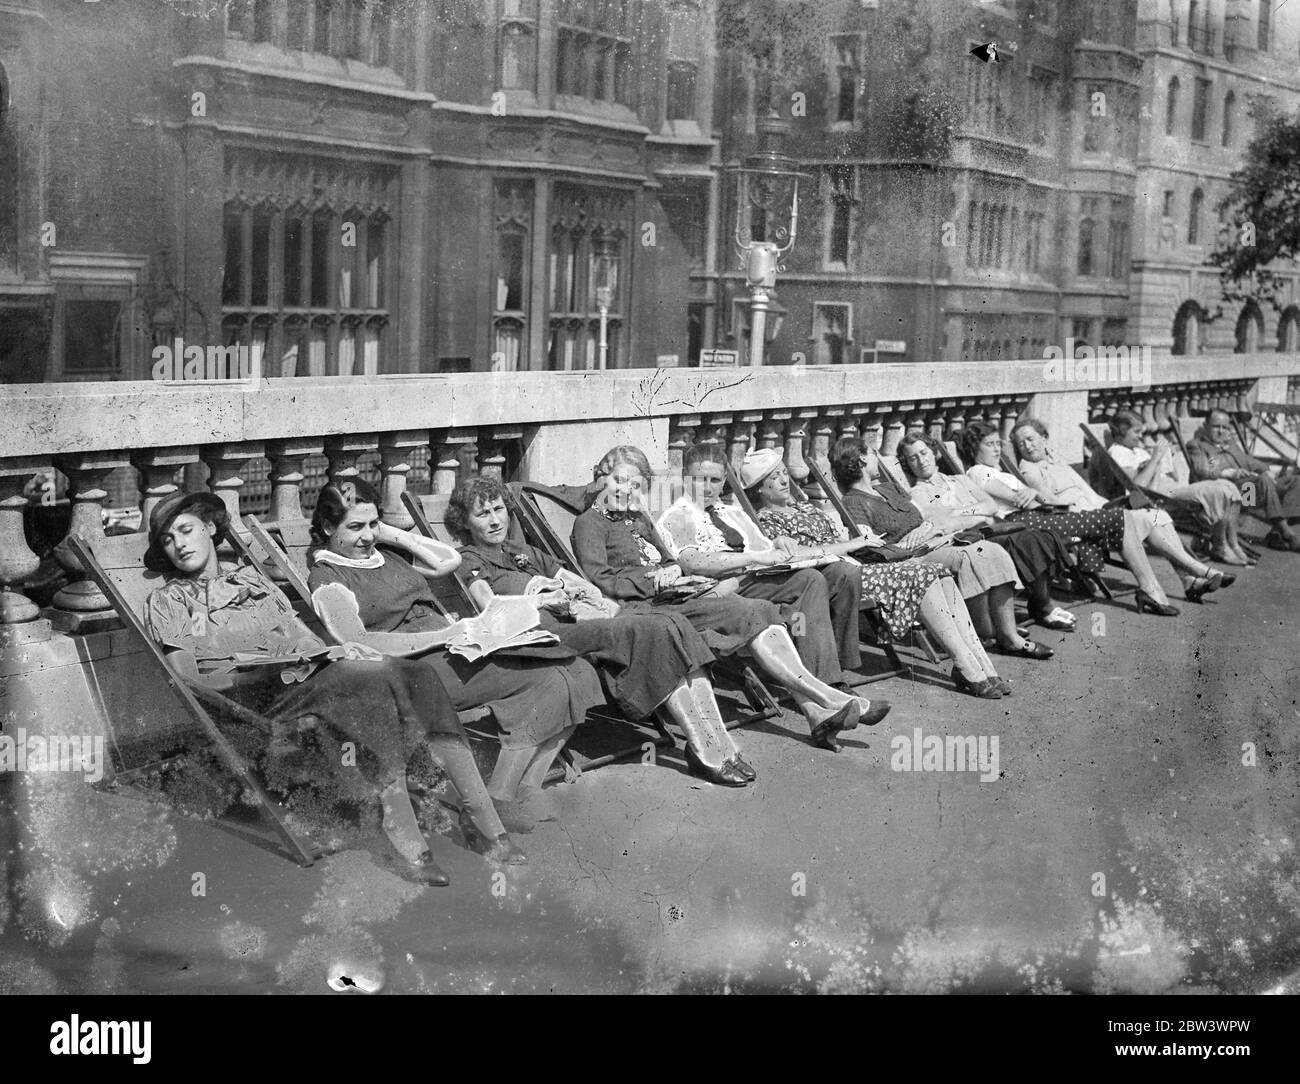 On London ' s  Promenade  Photo shows : A  seaside  atmosphere on the roof of Temple Station As Londoners sit back in deck chairs and reap the benefits of London ' s heat wave . 17 Aug 1936 Stock Photo